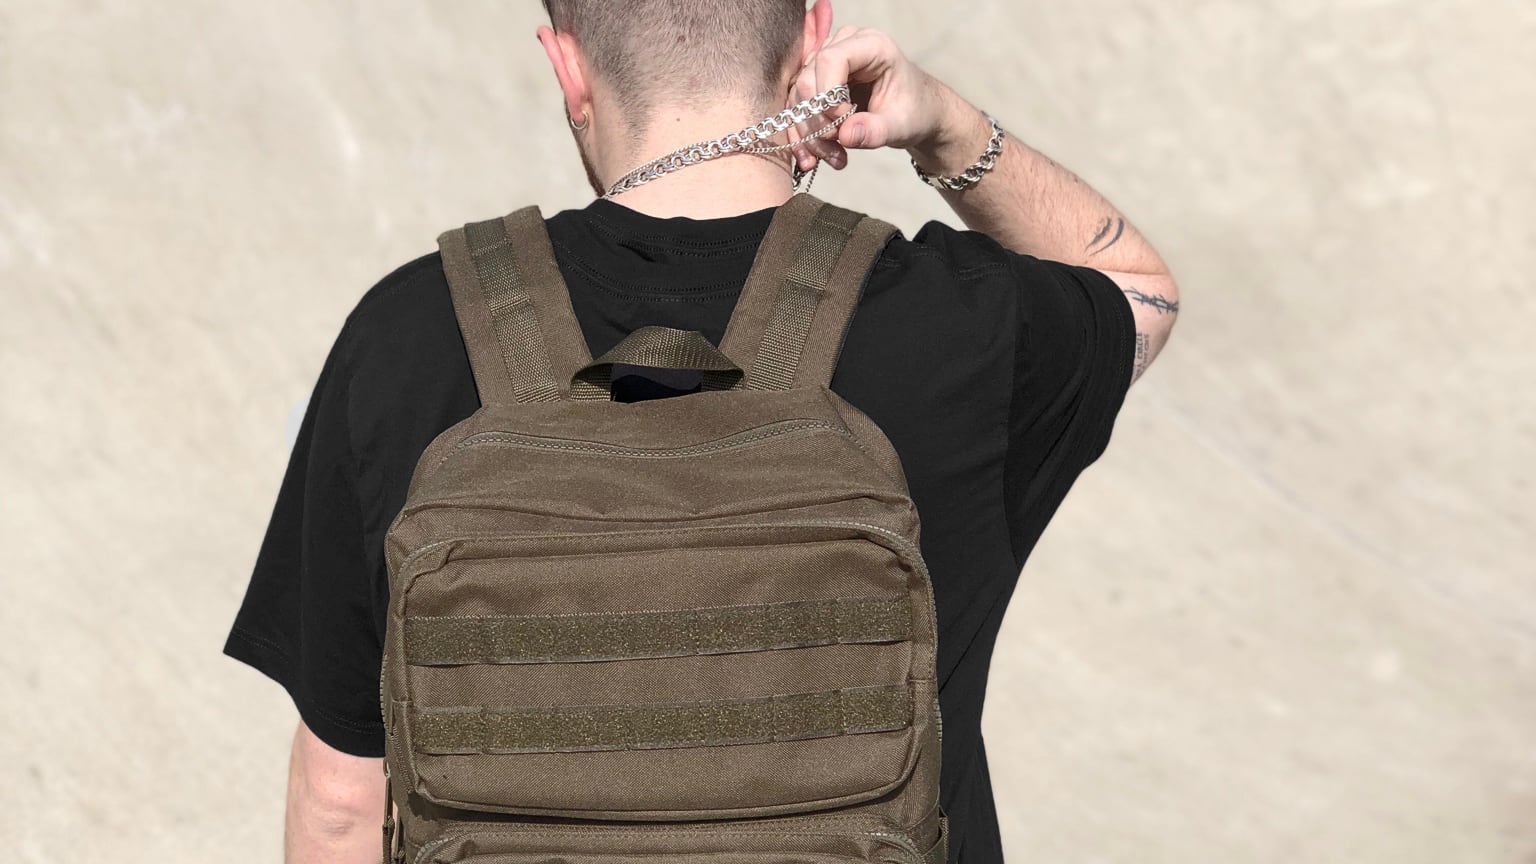 Model wearing the Tactical Bag in military green